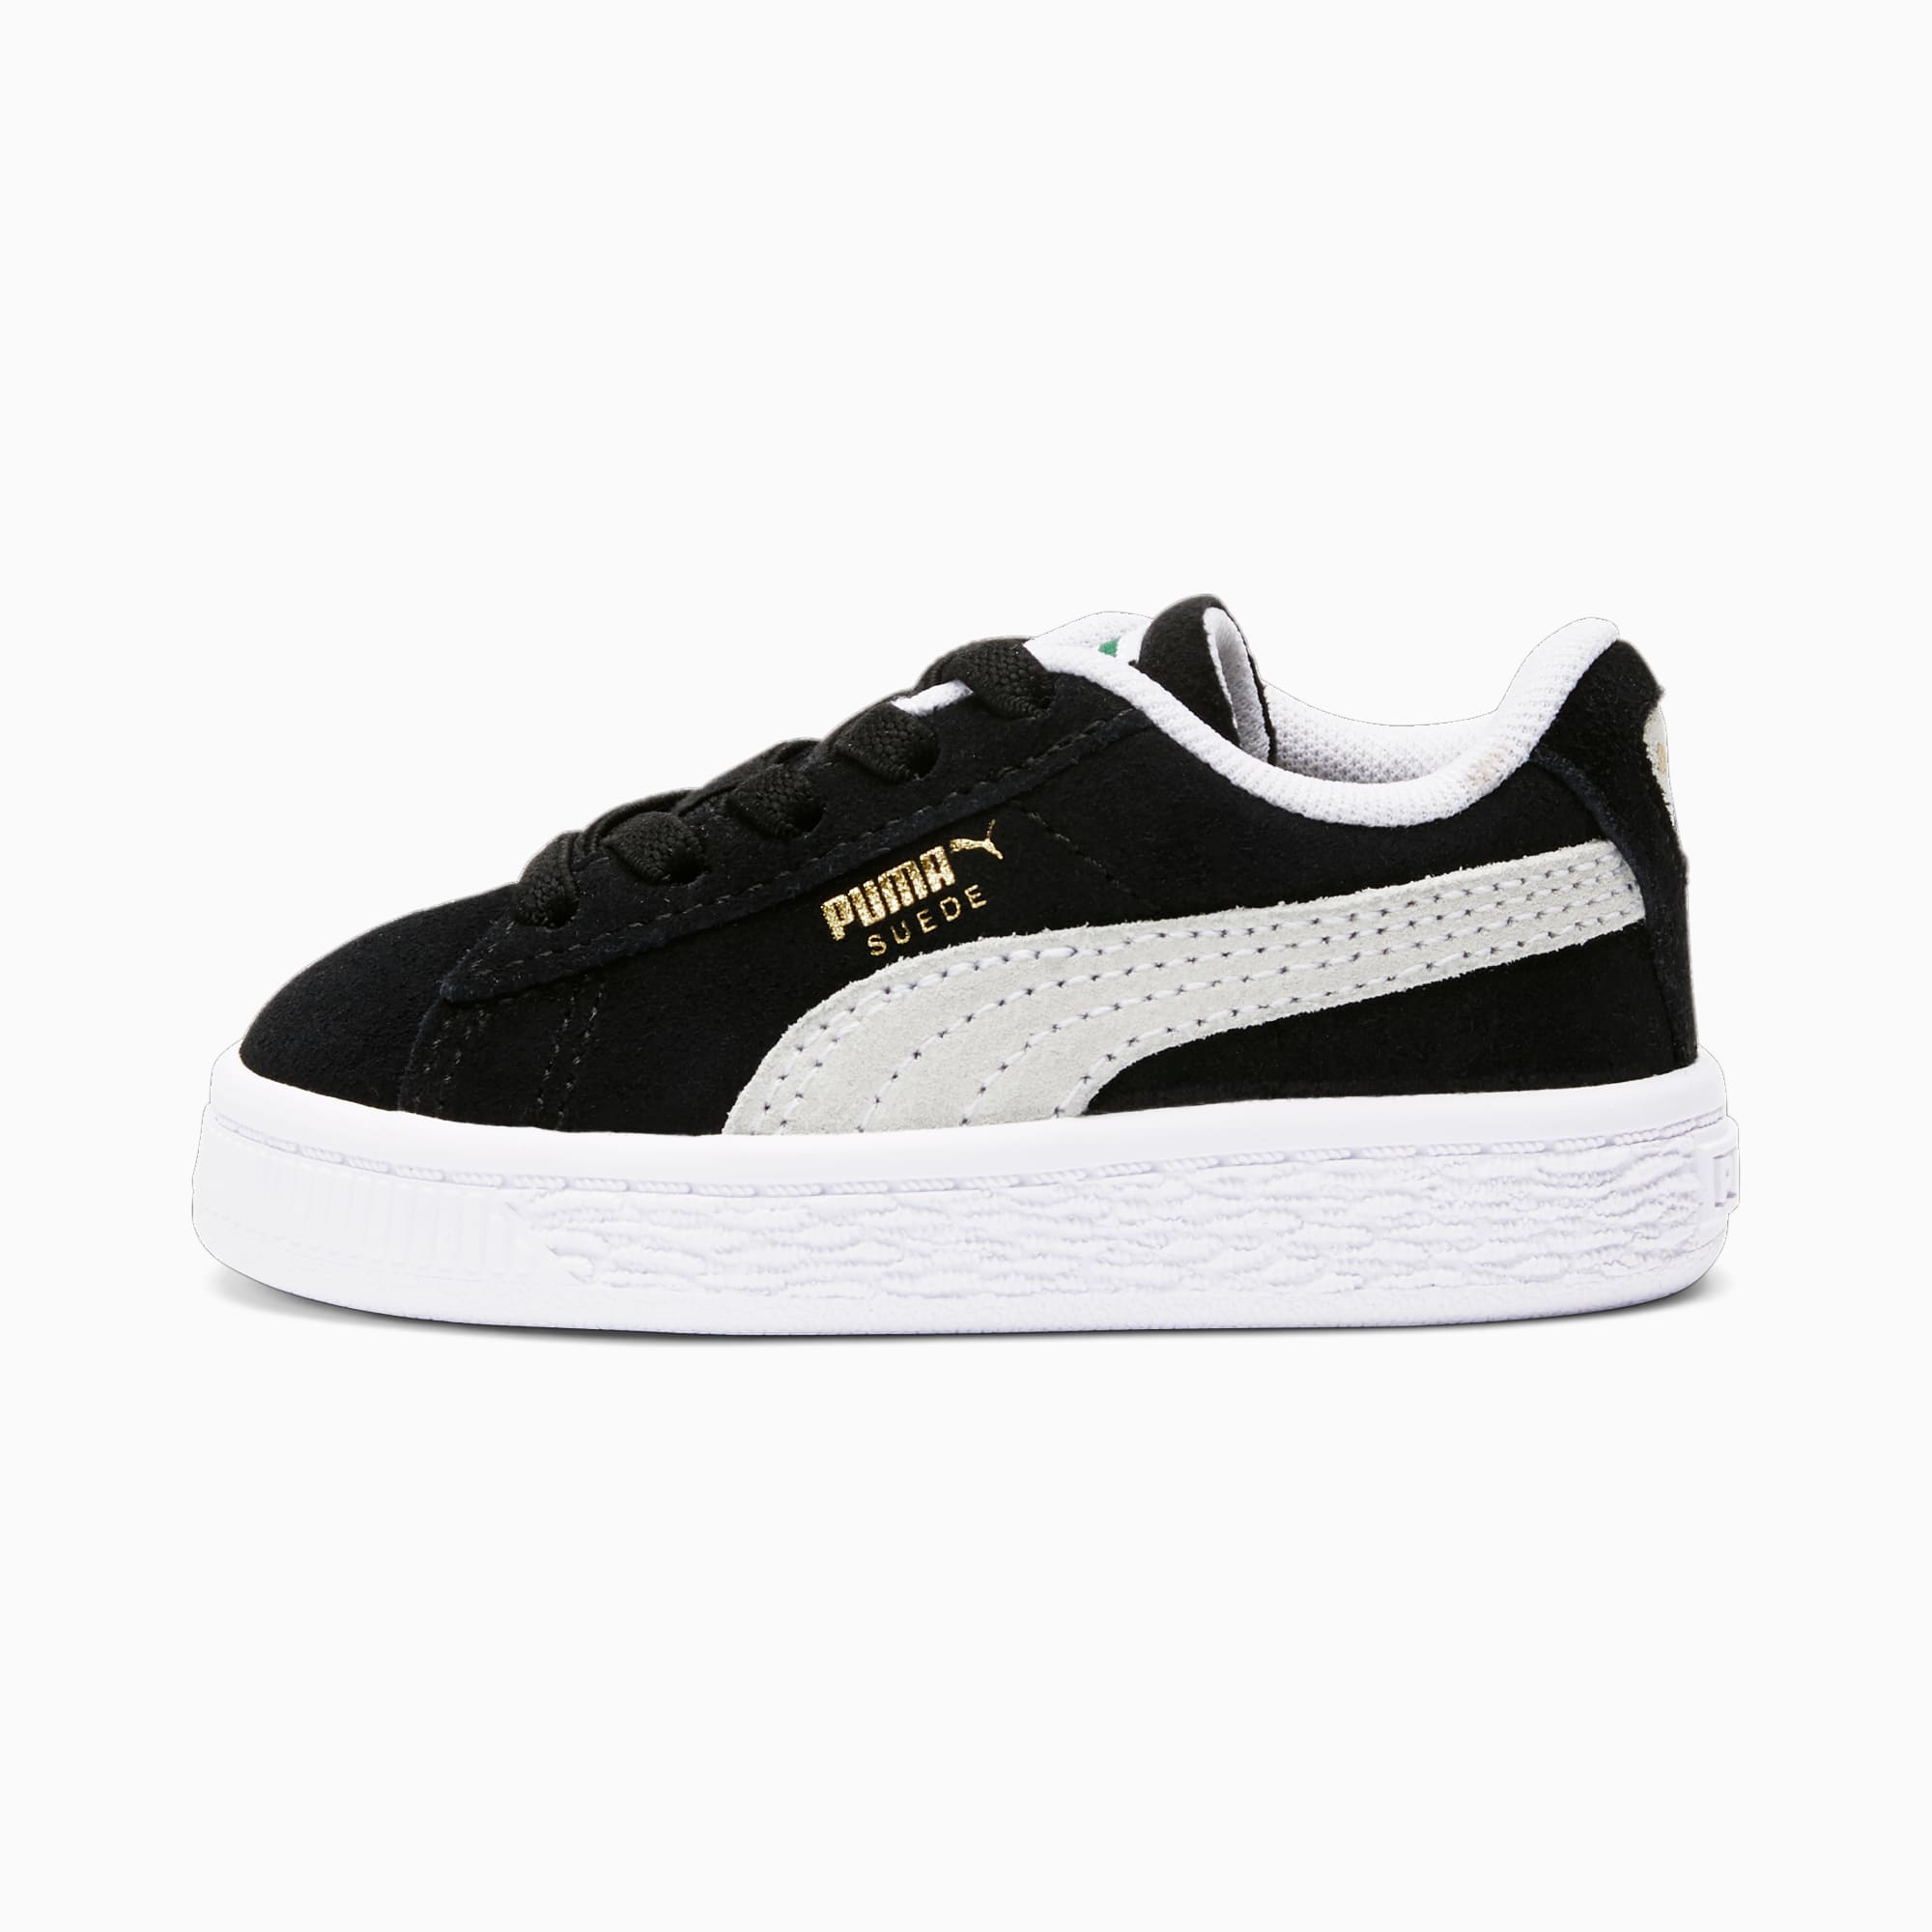 Puma Suede Classic XXI Black/White Toddler Boys' Shoes, Size: 7